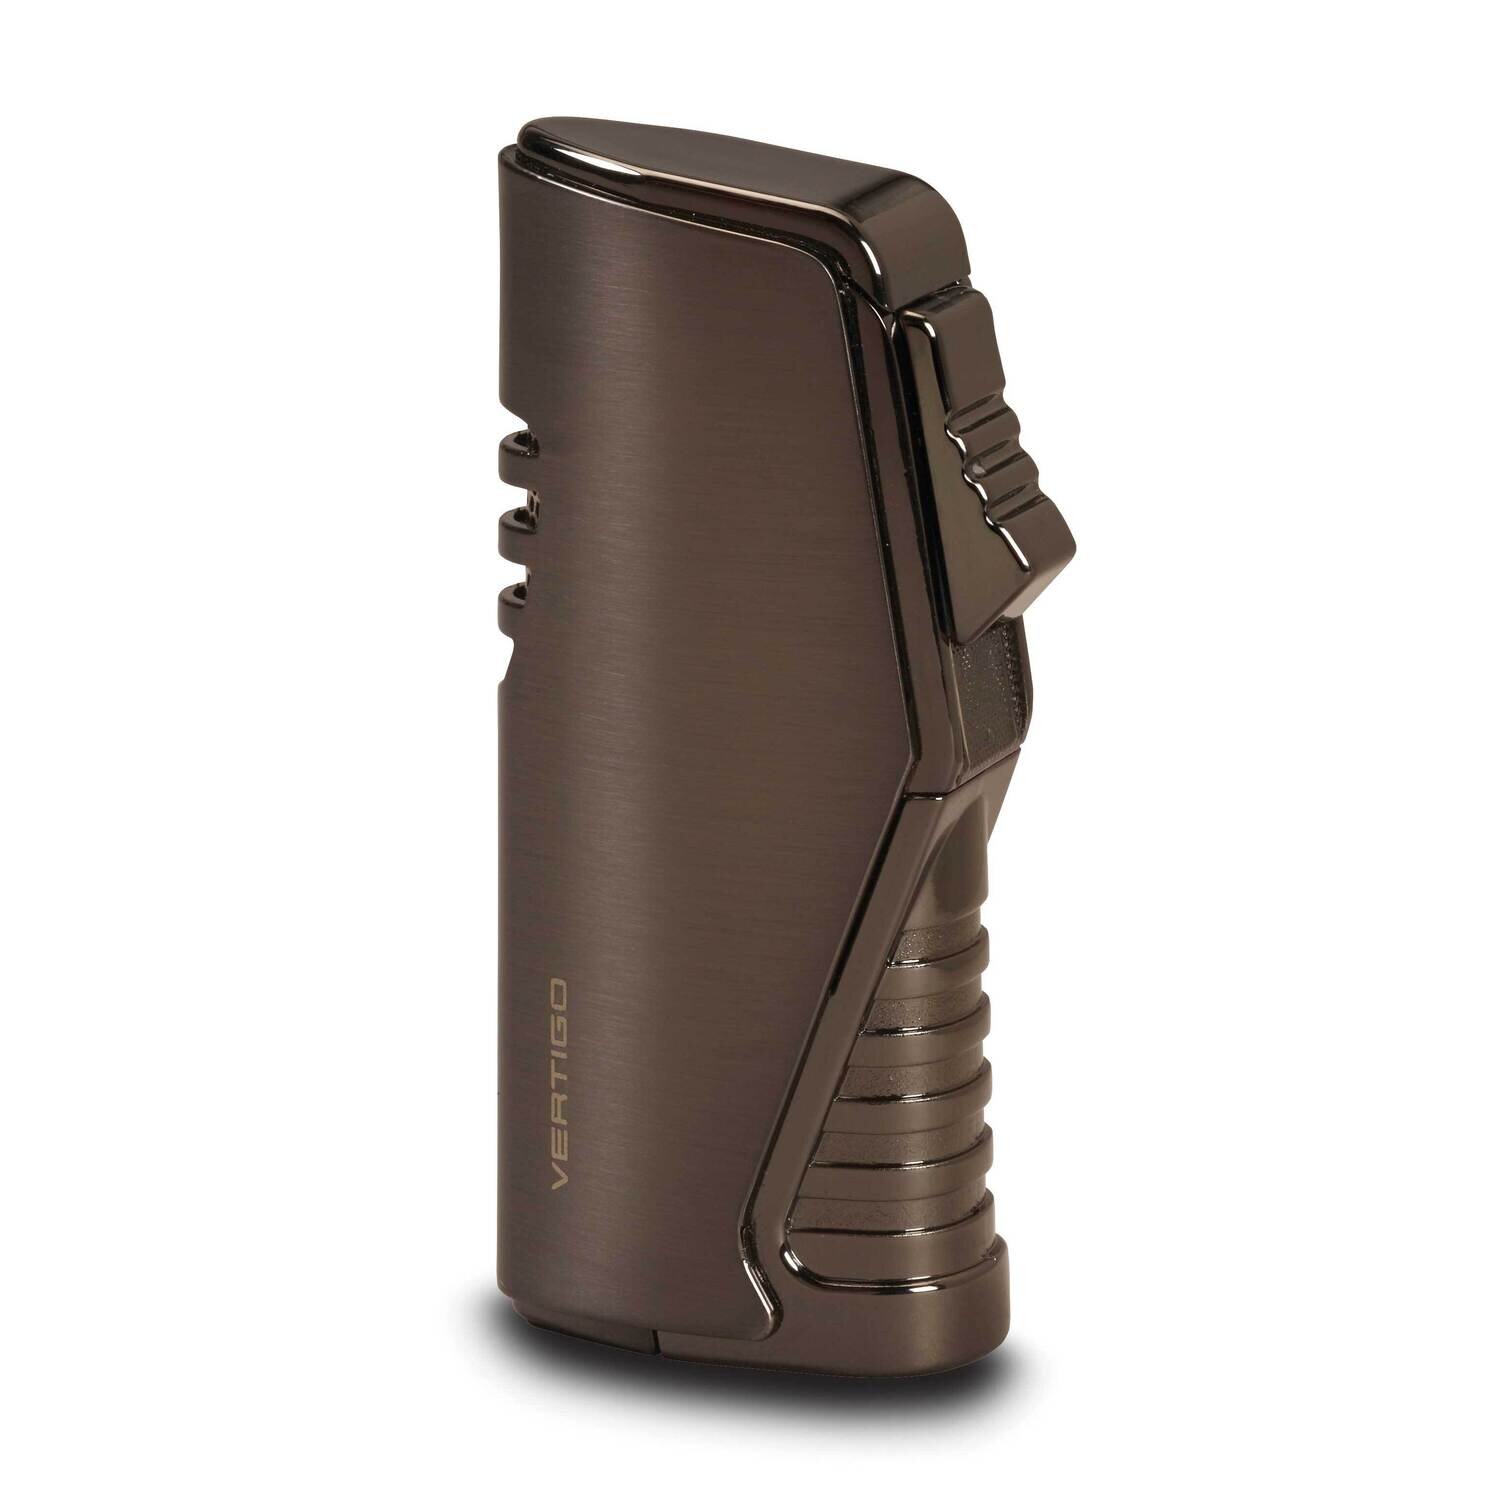 Atlas Triple Flame Lighter with Fold-out Punch Gun GM23326